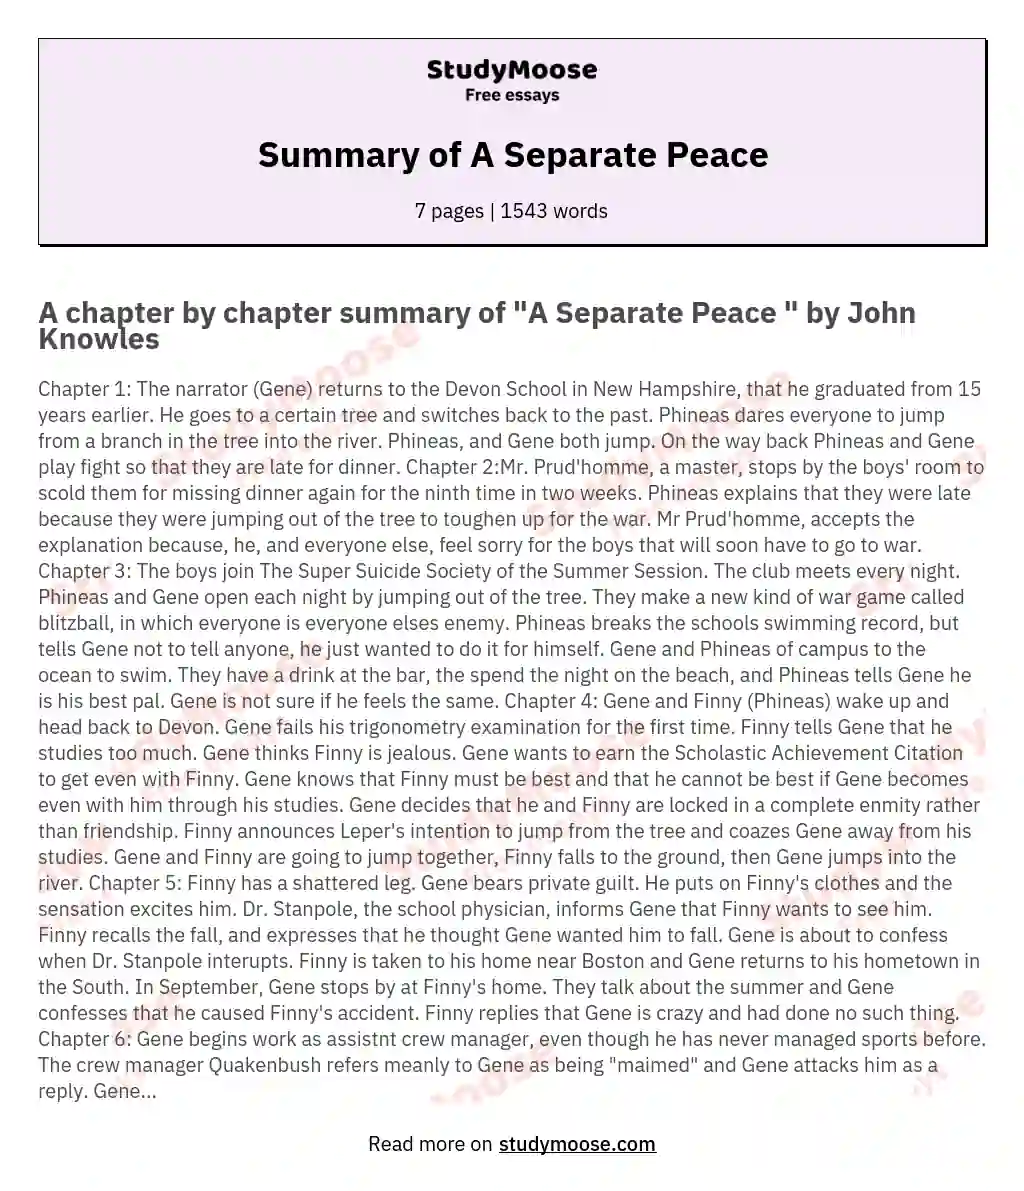 Summary of A Separate Peace essay